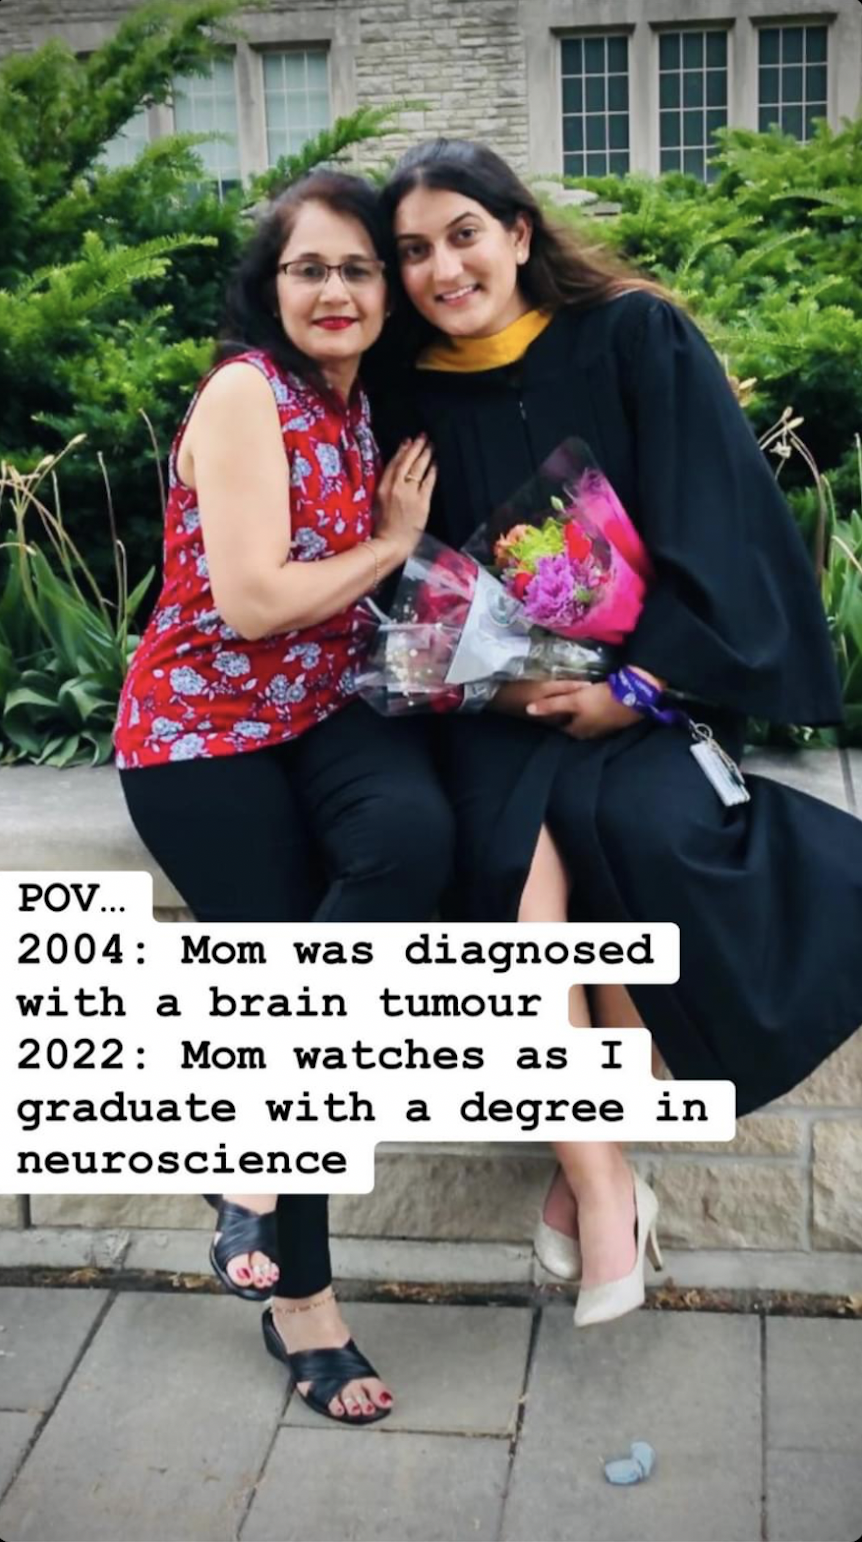 Photo of Shreya and her mom. POV: 2004: Mom was diagnosed with a brain tumour. 2022: Mom watches as I graduate with a degree in neuroscience